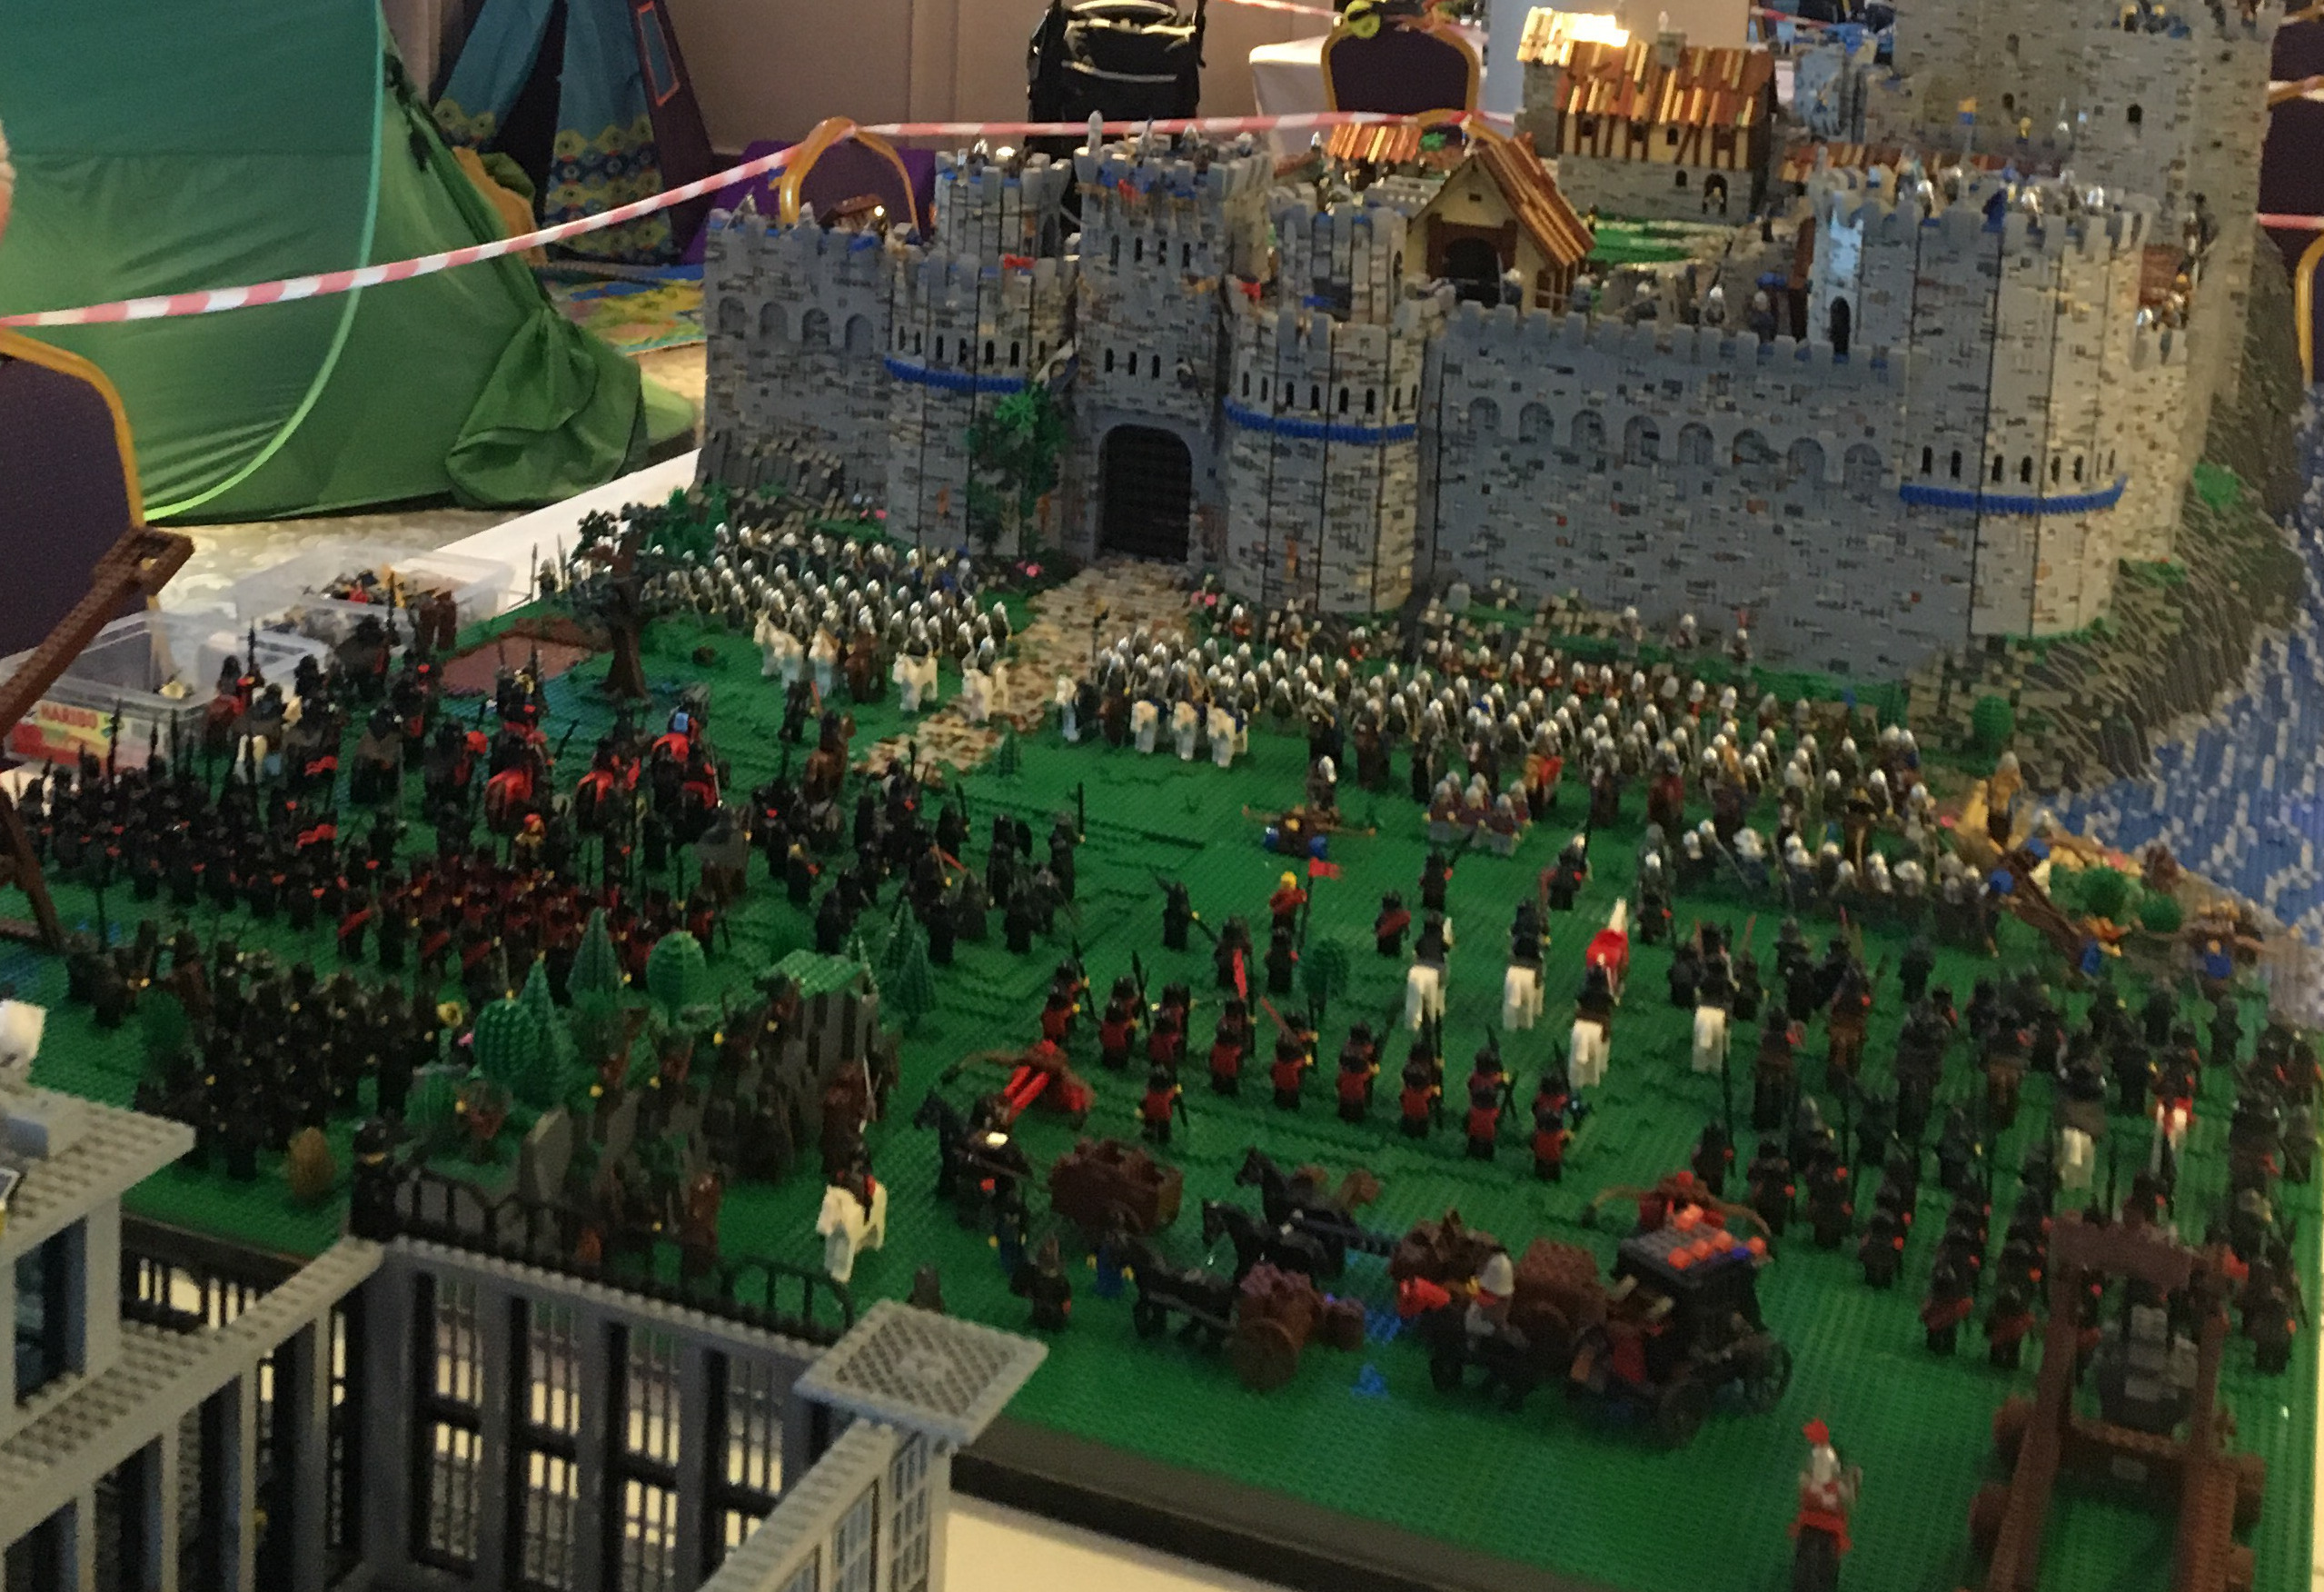 Killarney Lego Show | Events On In Kerry Ireland | Your Days Out